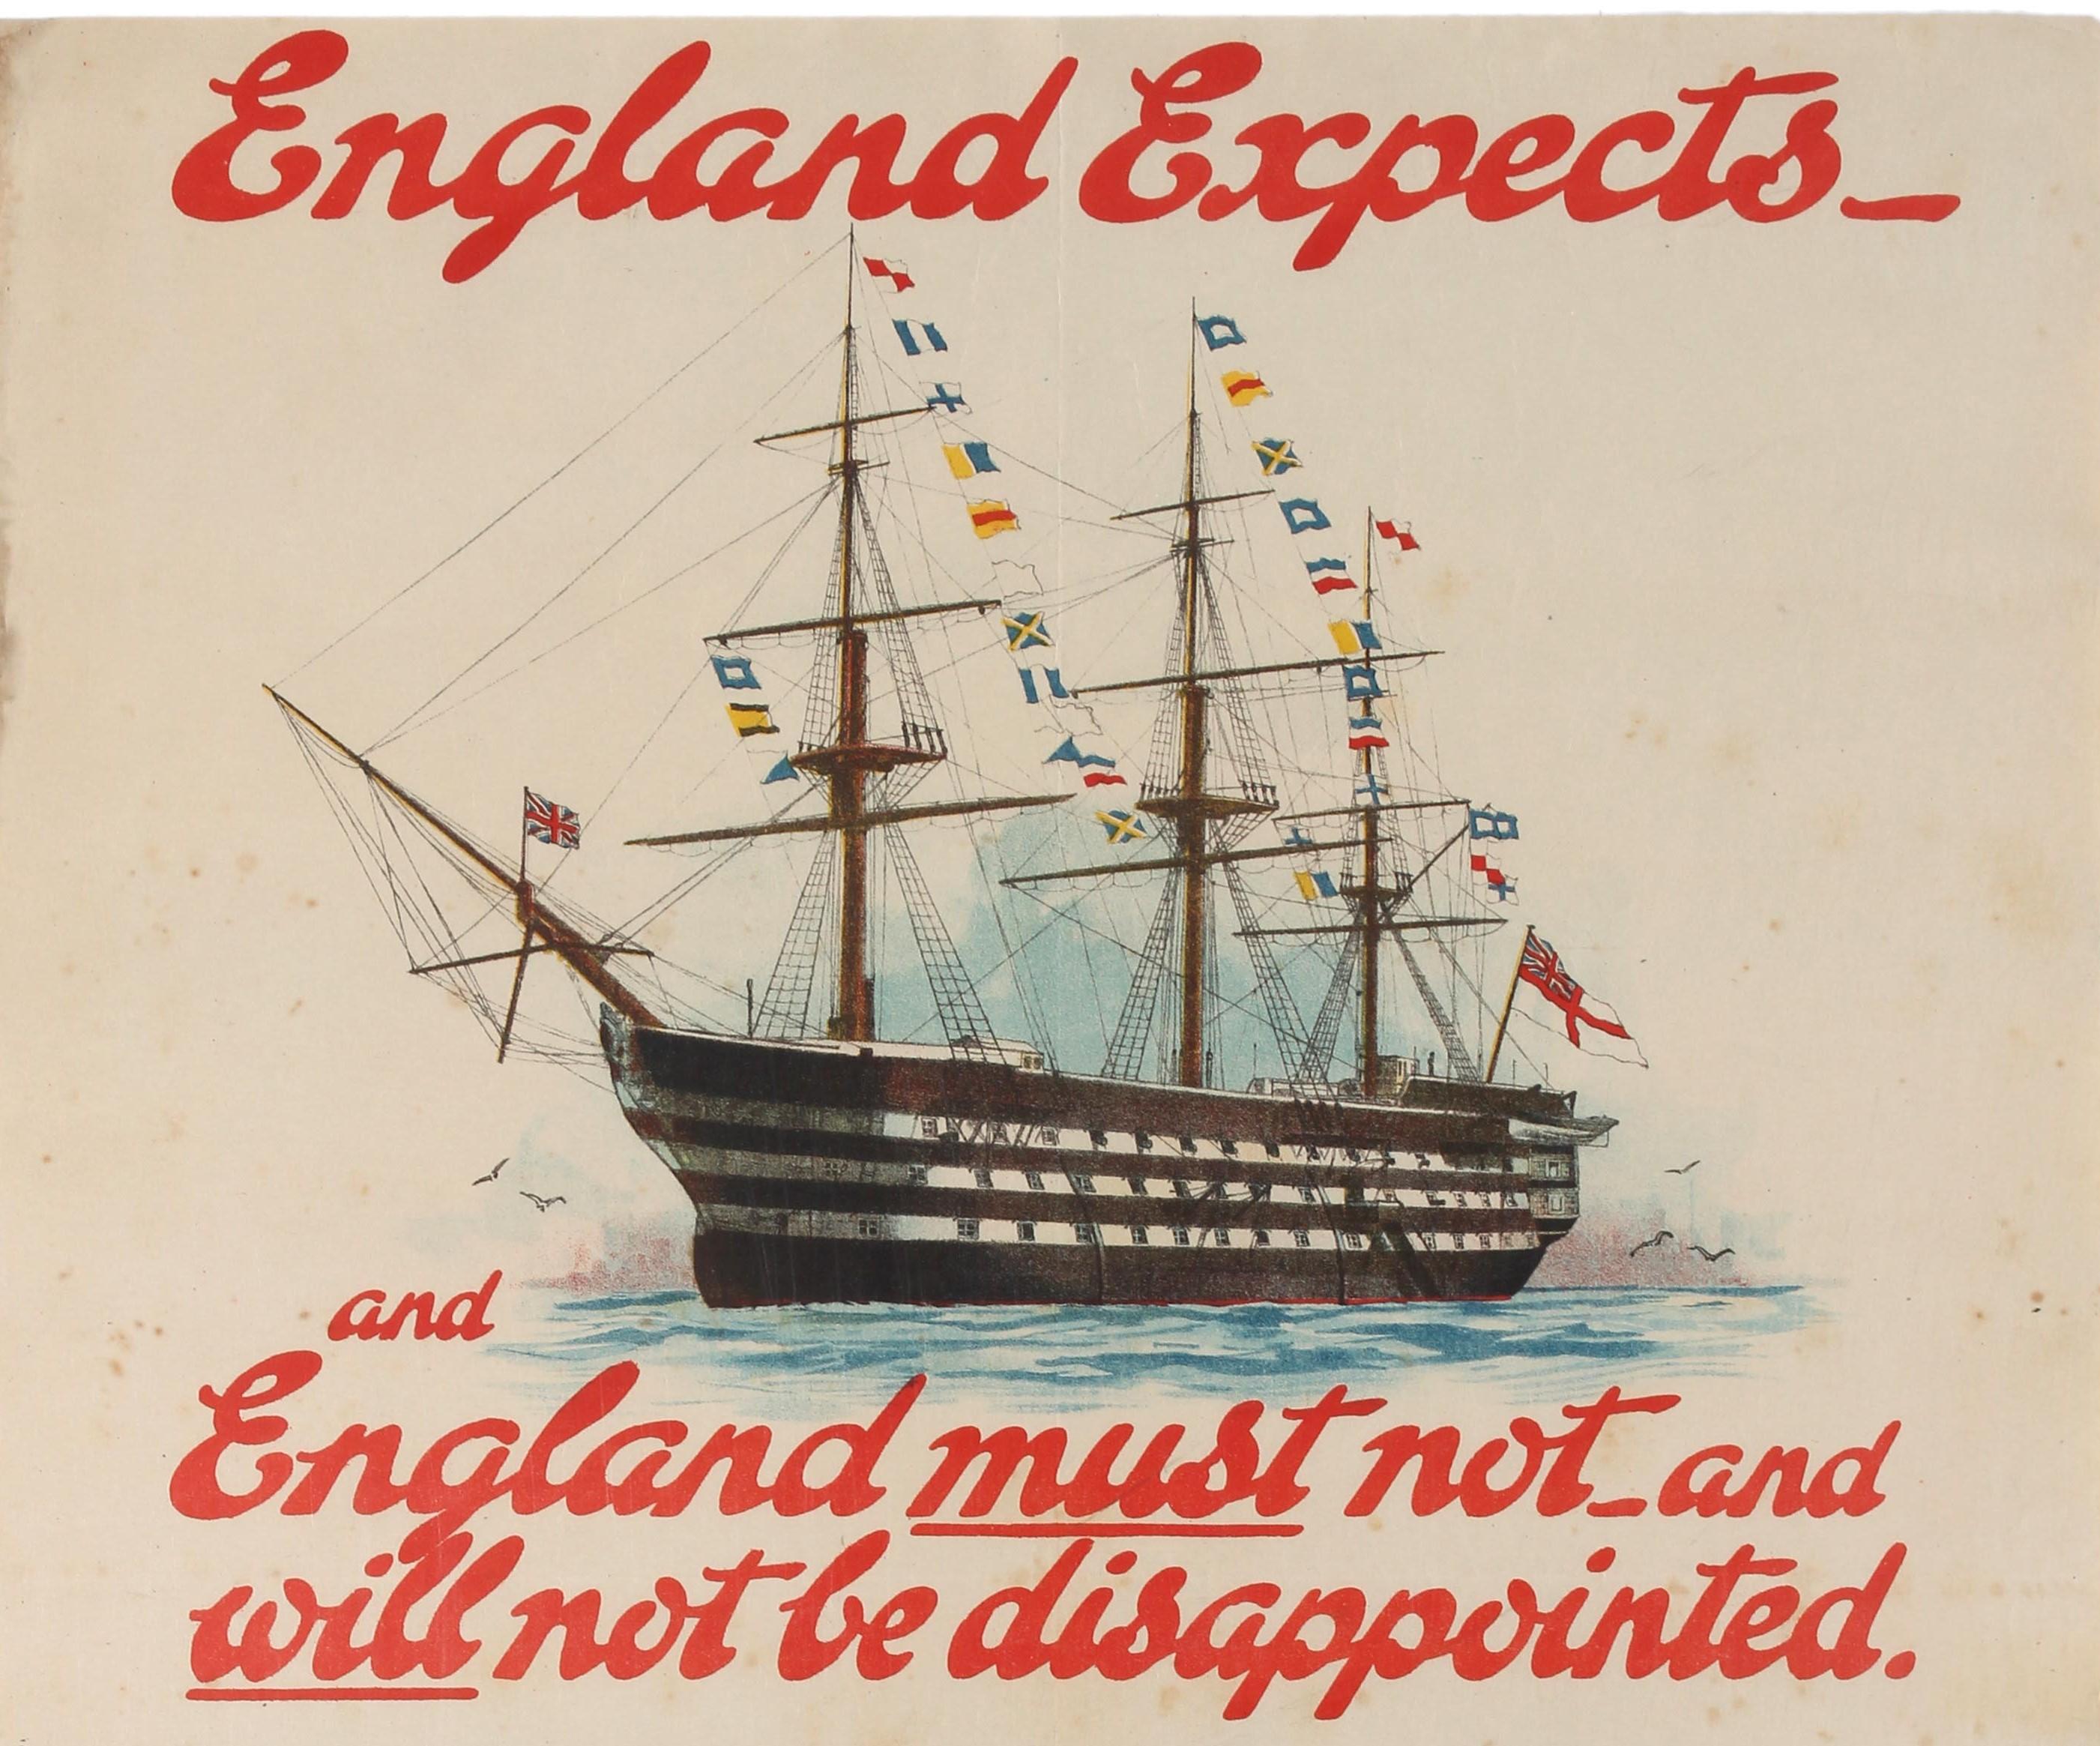 Original antique World War One Royal Navy recruitment propaganda poster - England Expects And England must not and will not be disappointed Recruits wanted for the Royal Naval Division to serve during the period of the War, featuring the Royal Navy